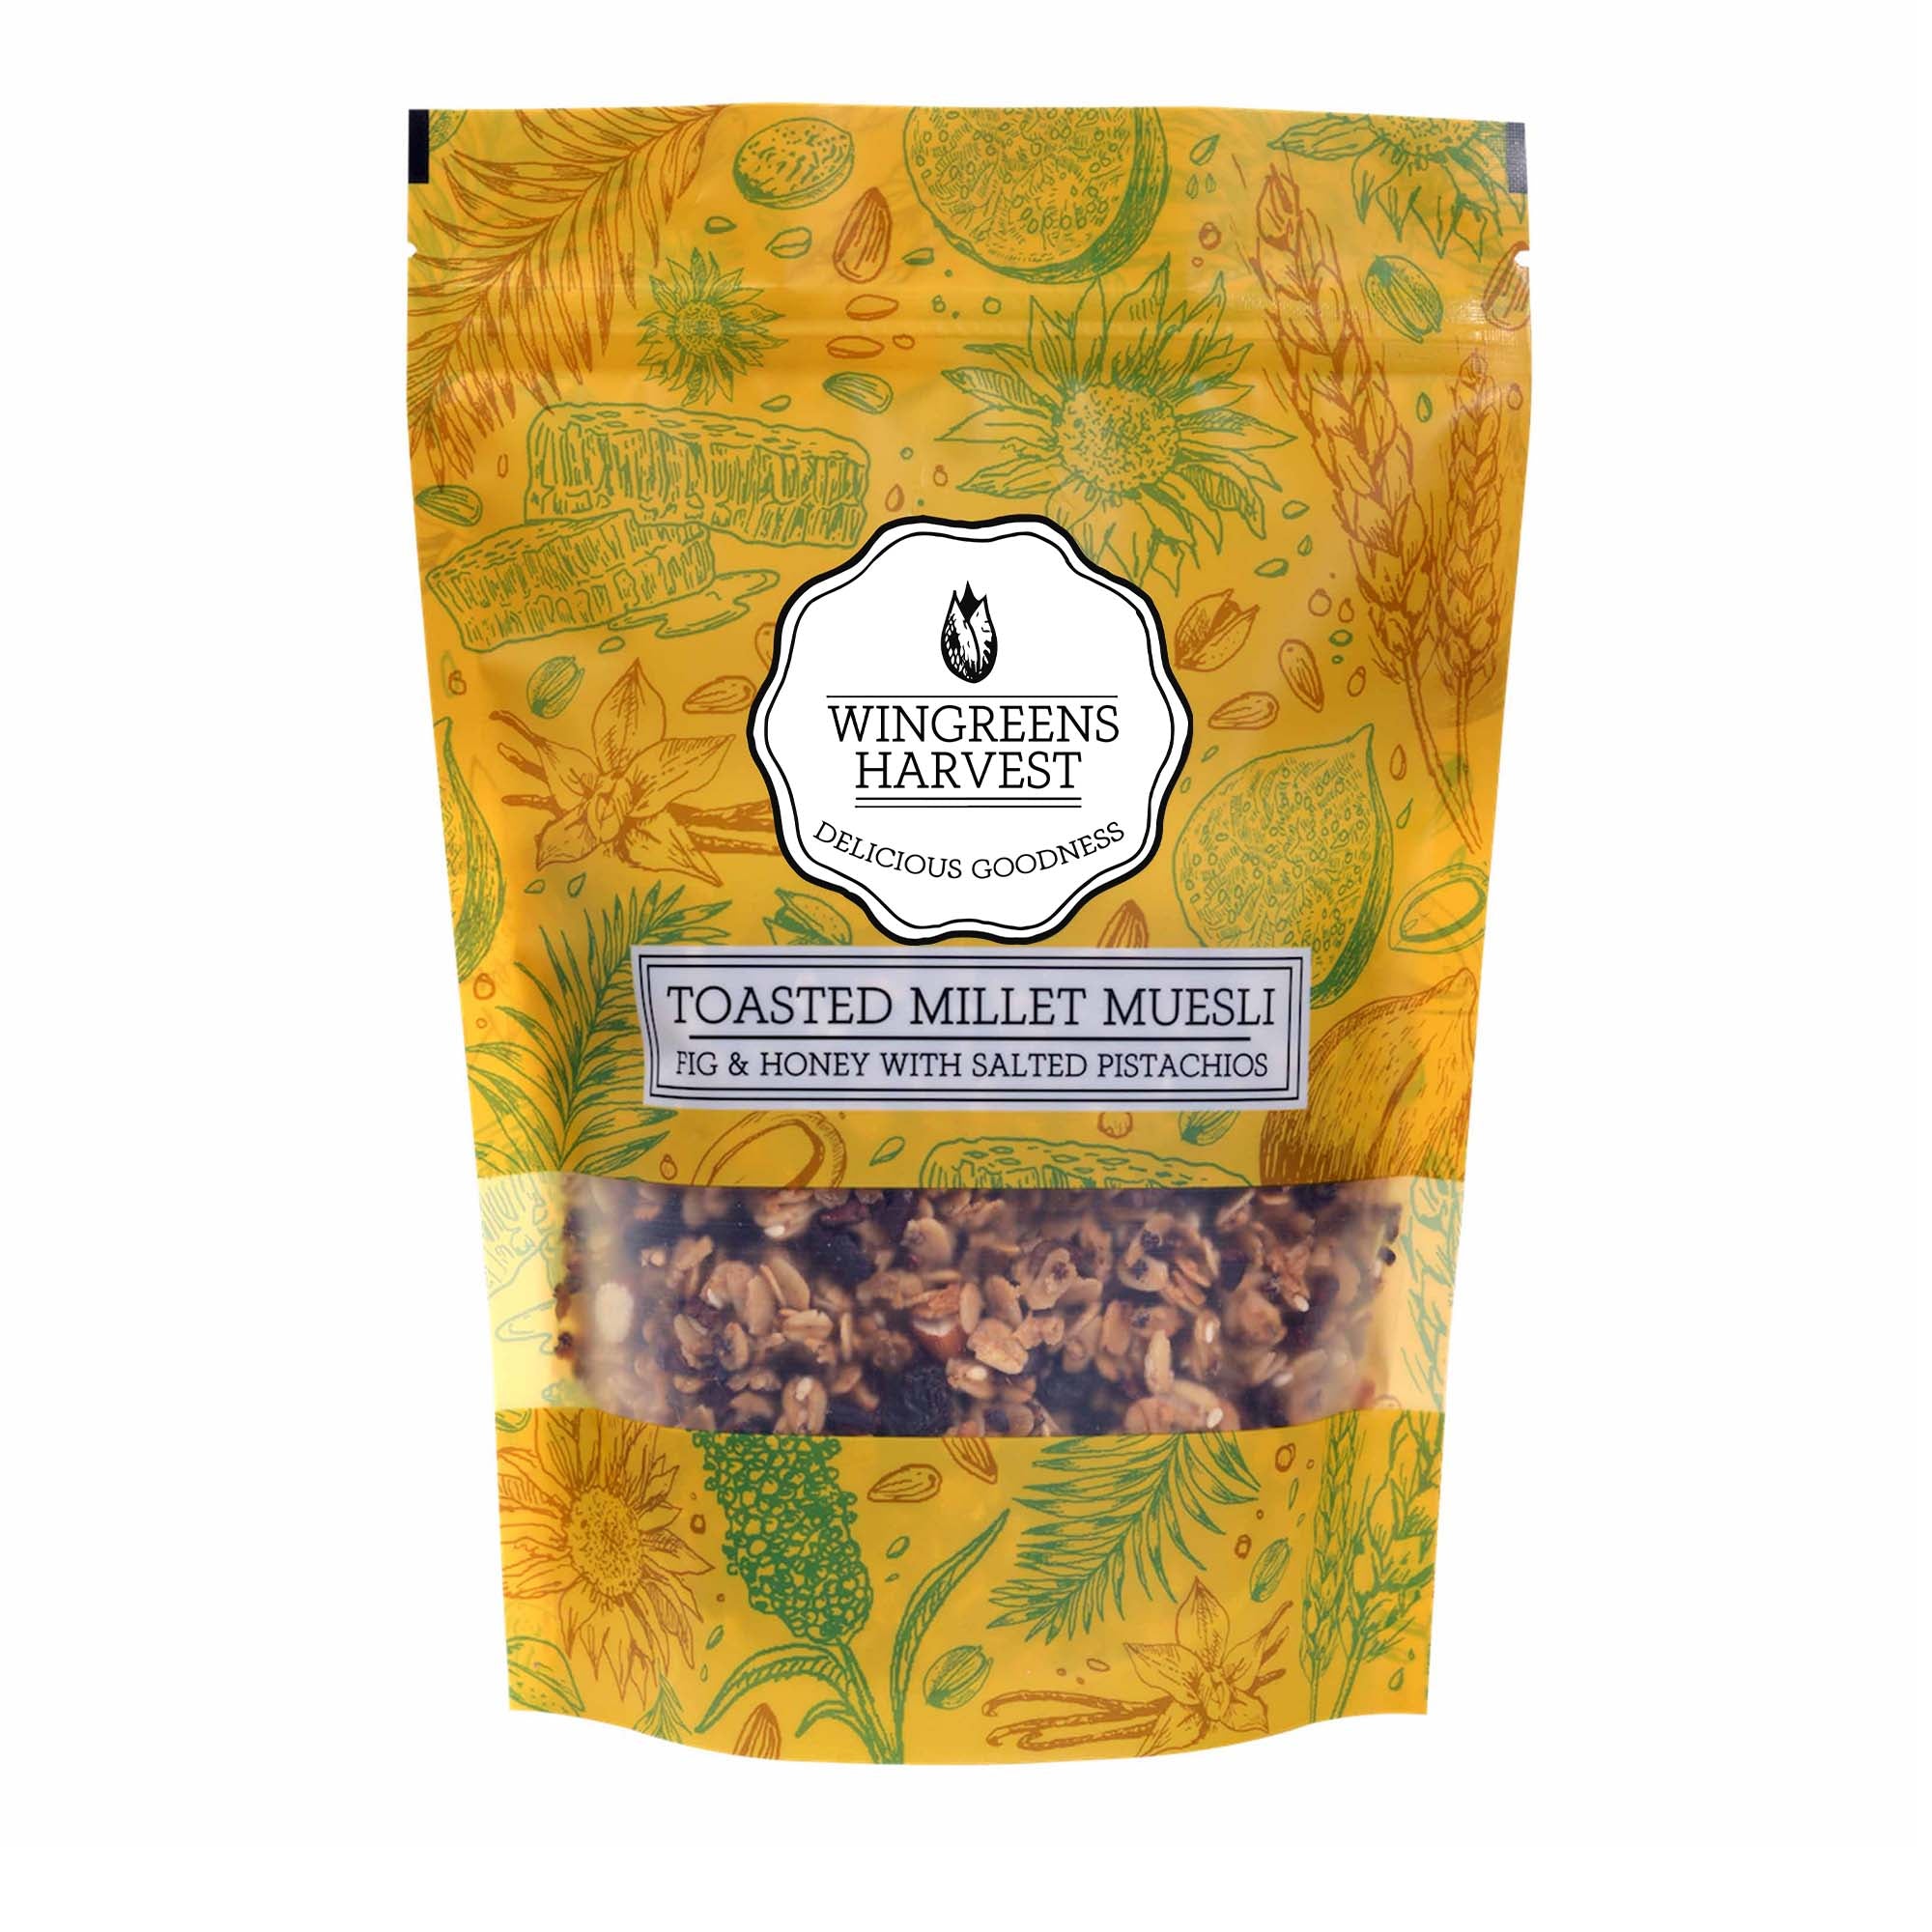 Toasted Millet Muesli - Fig & Honey with Salted Pistachios 250 g